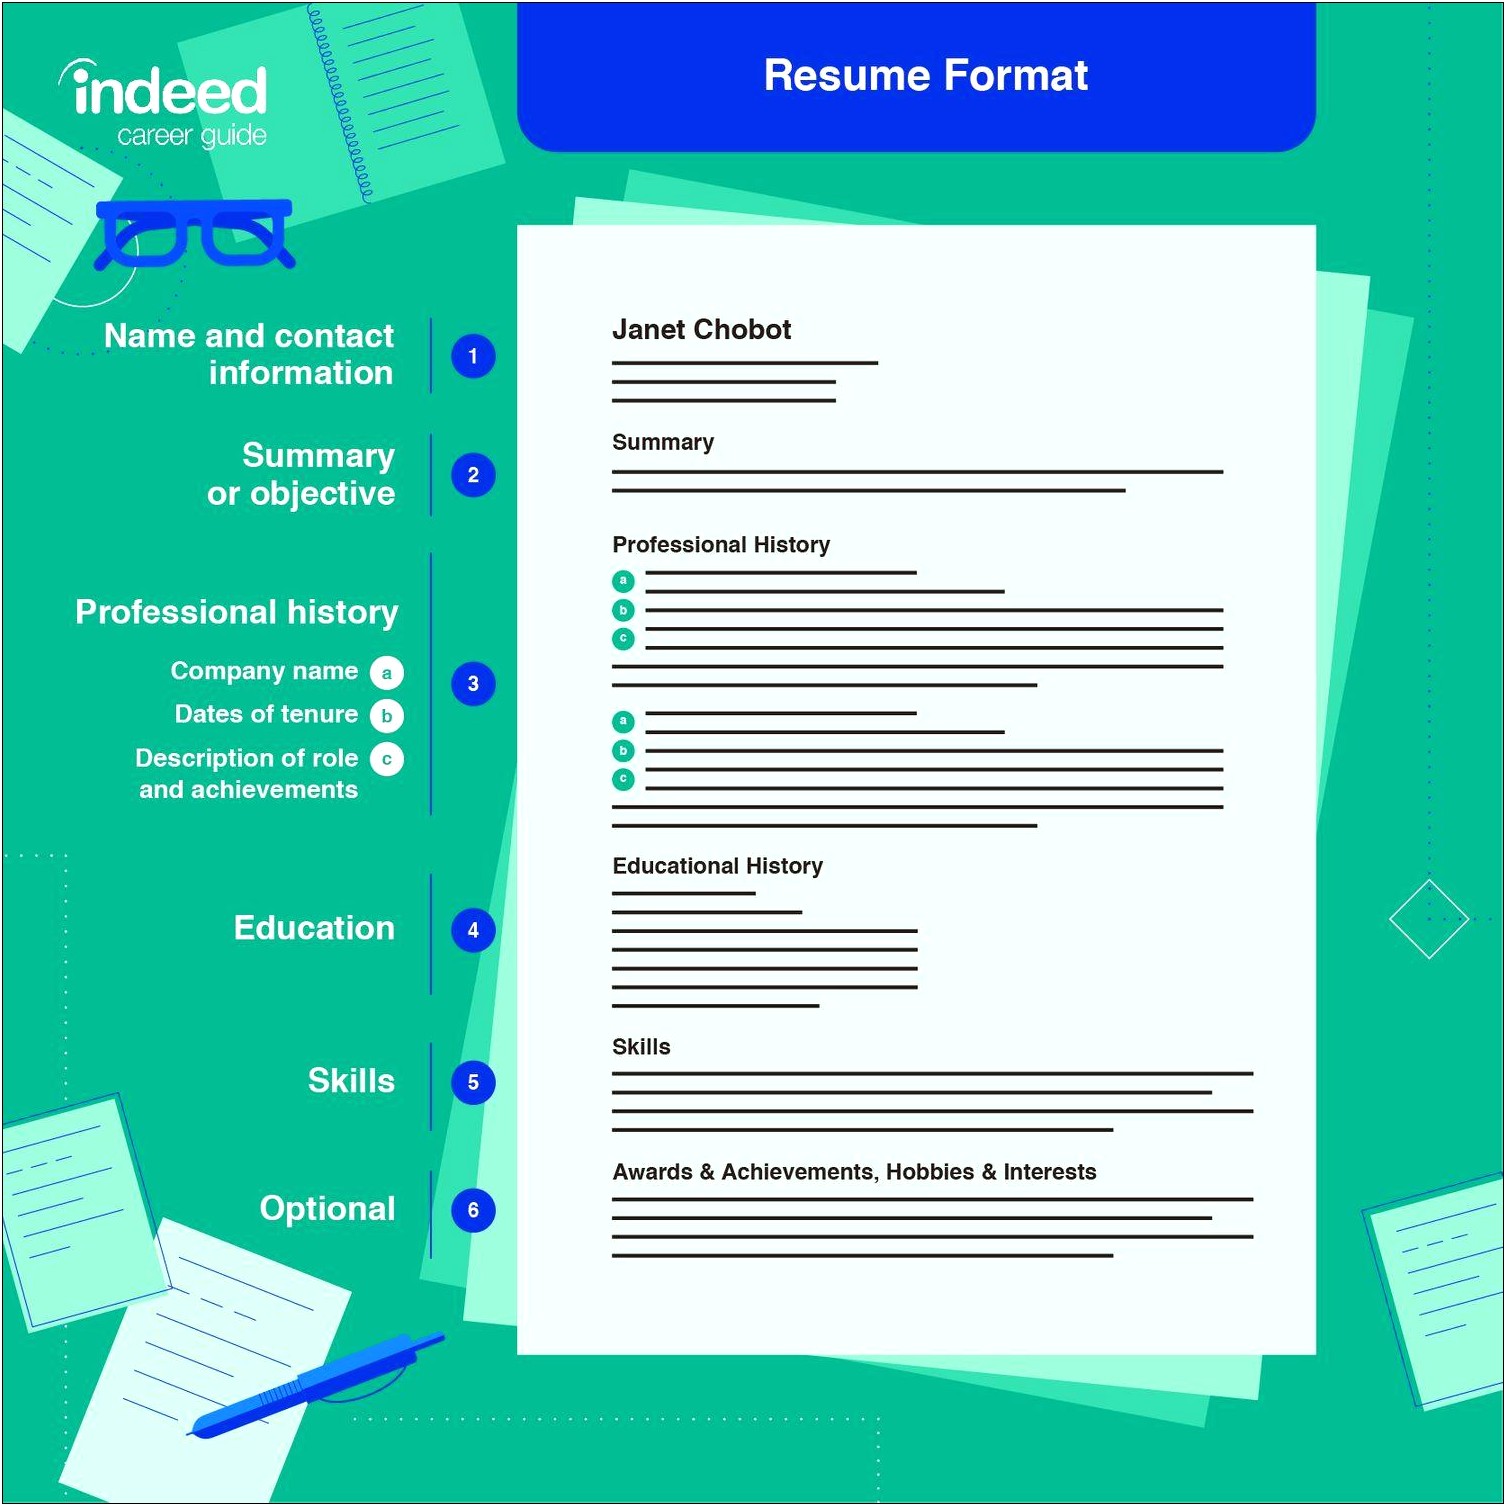 Best Font To Use For Tech Resume